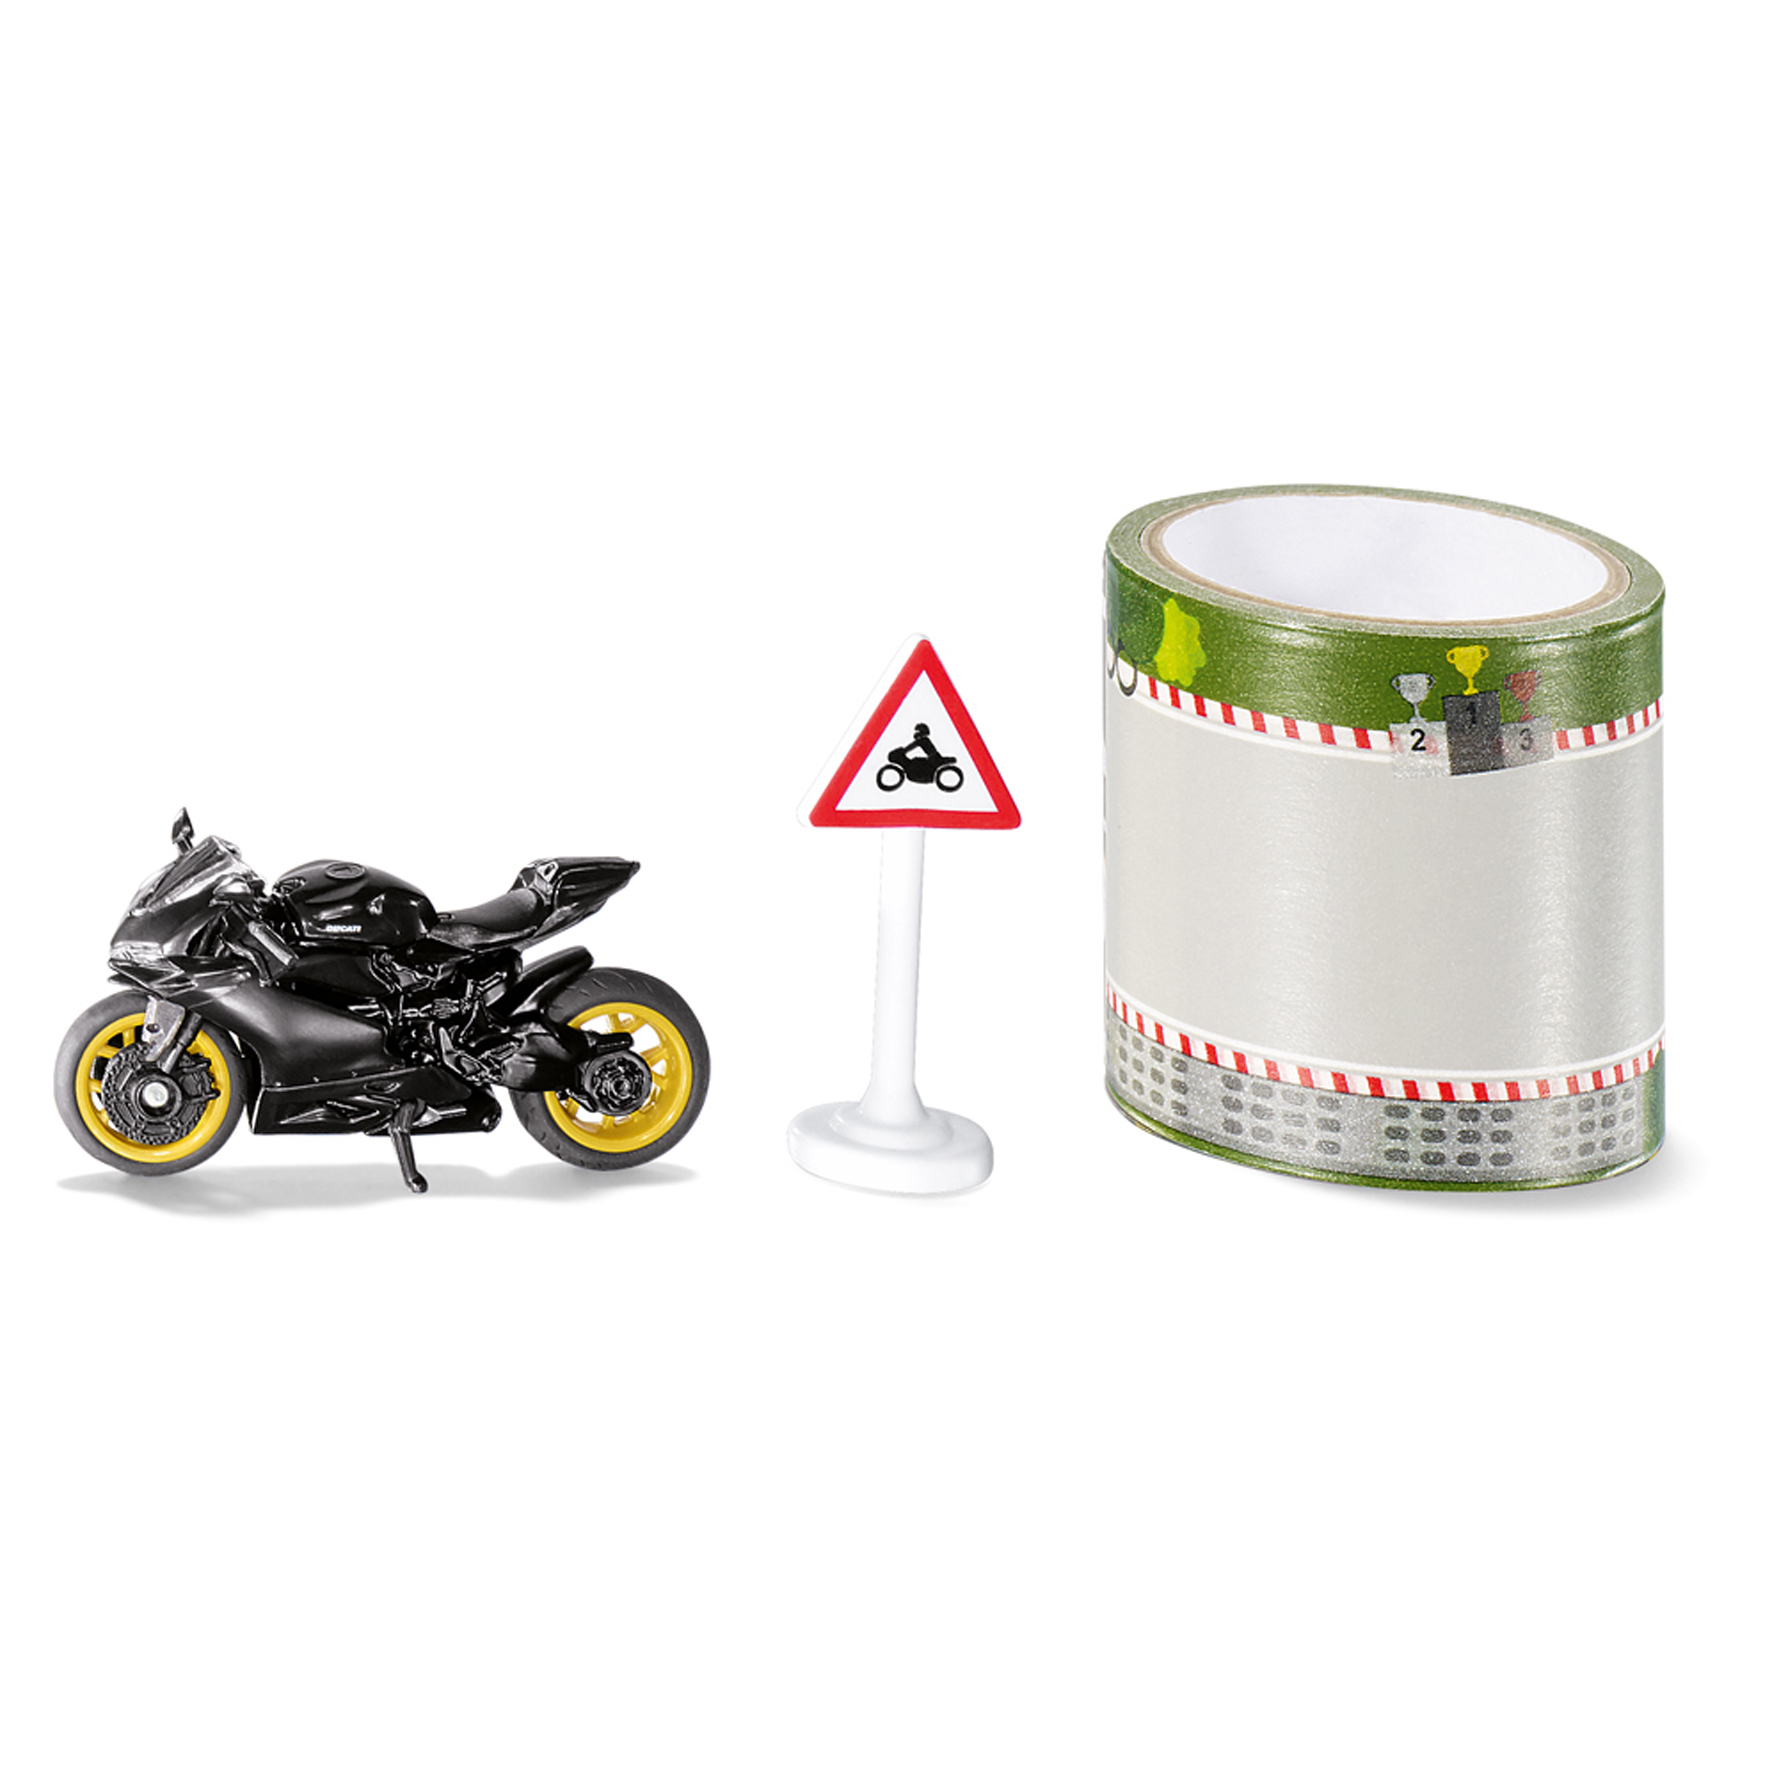 Toy motorbikes & off-road vehicles siku motorbike with sign & roadtape